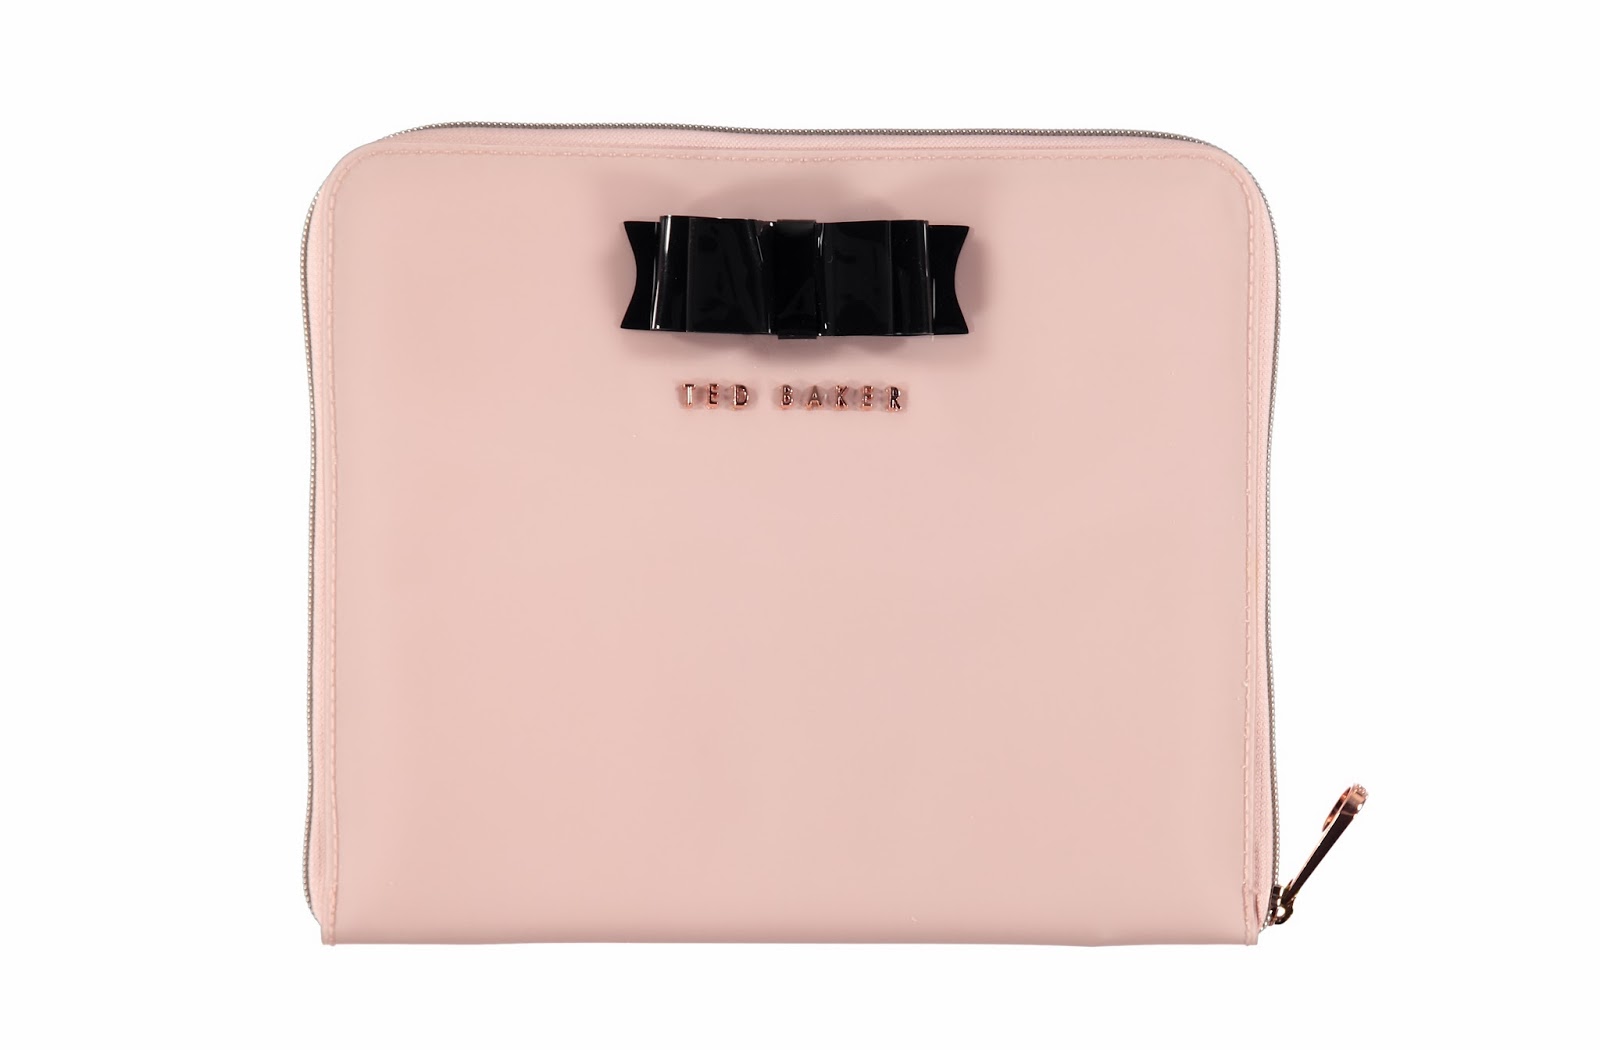 Ted Baker iPad case giveaway with Cruise Fashion